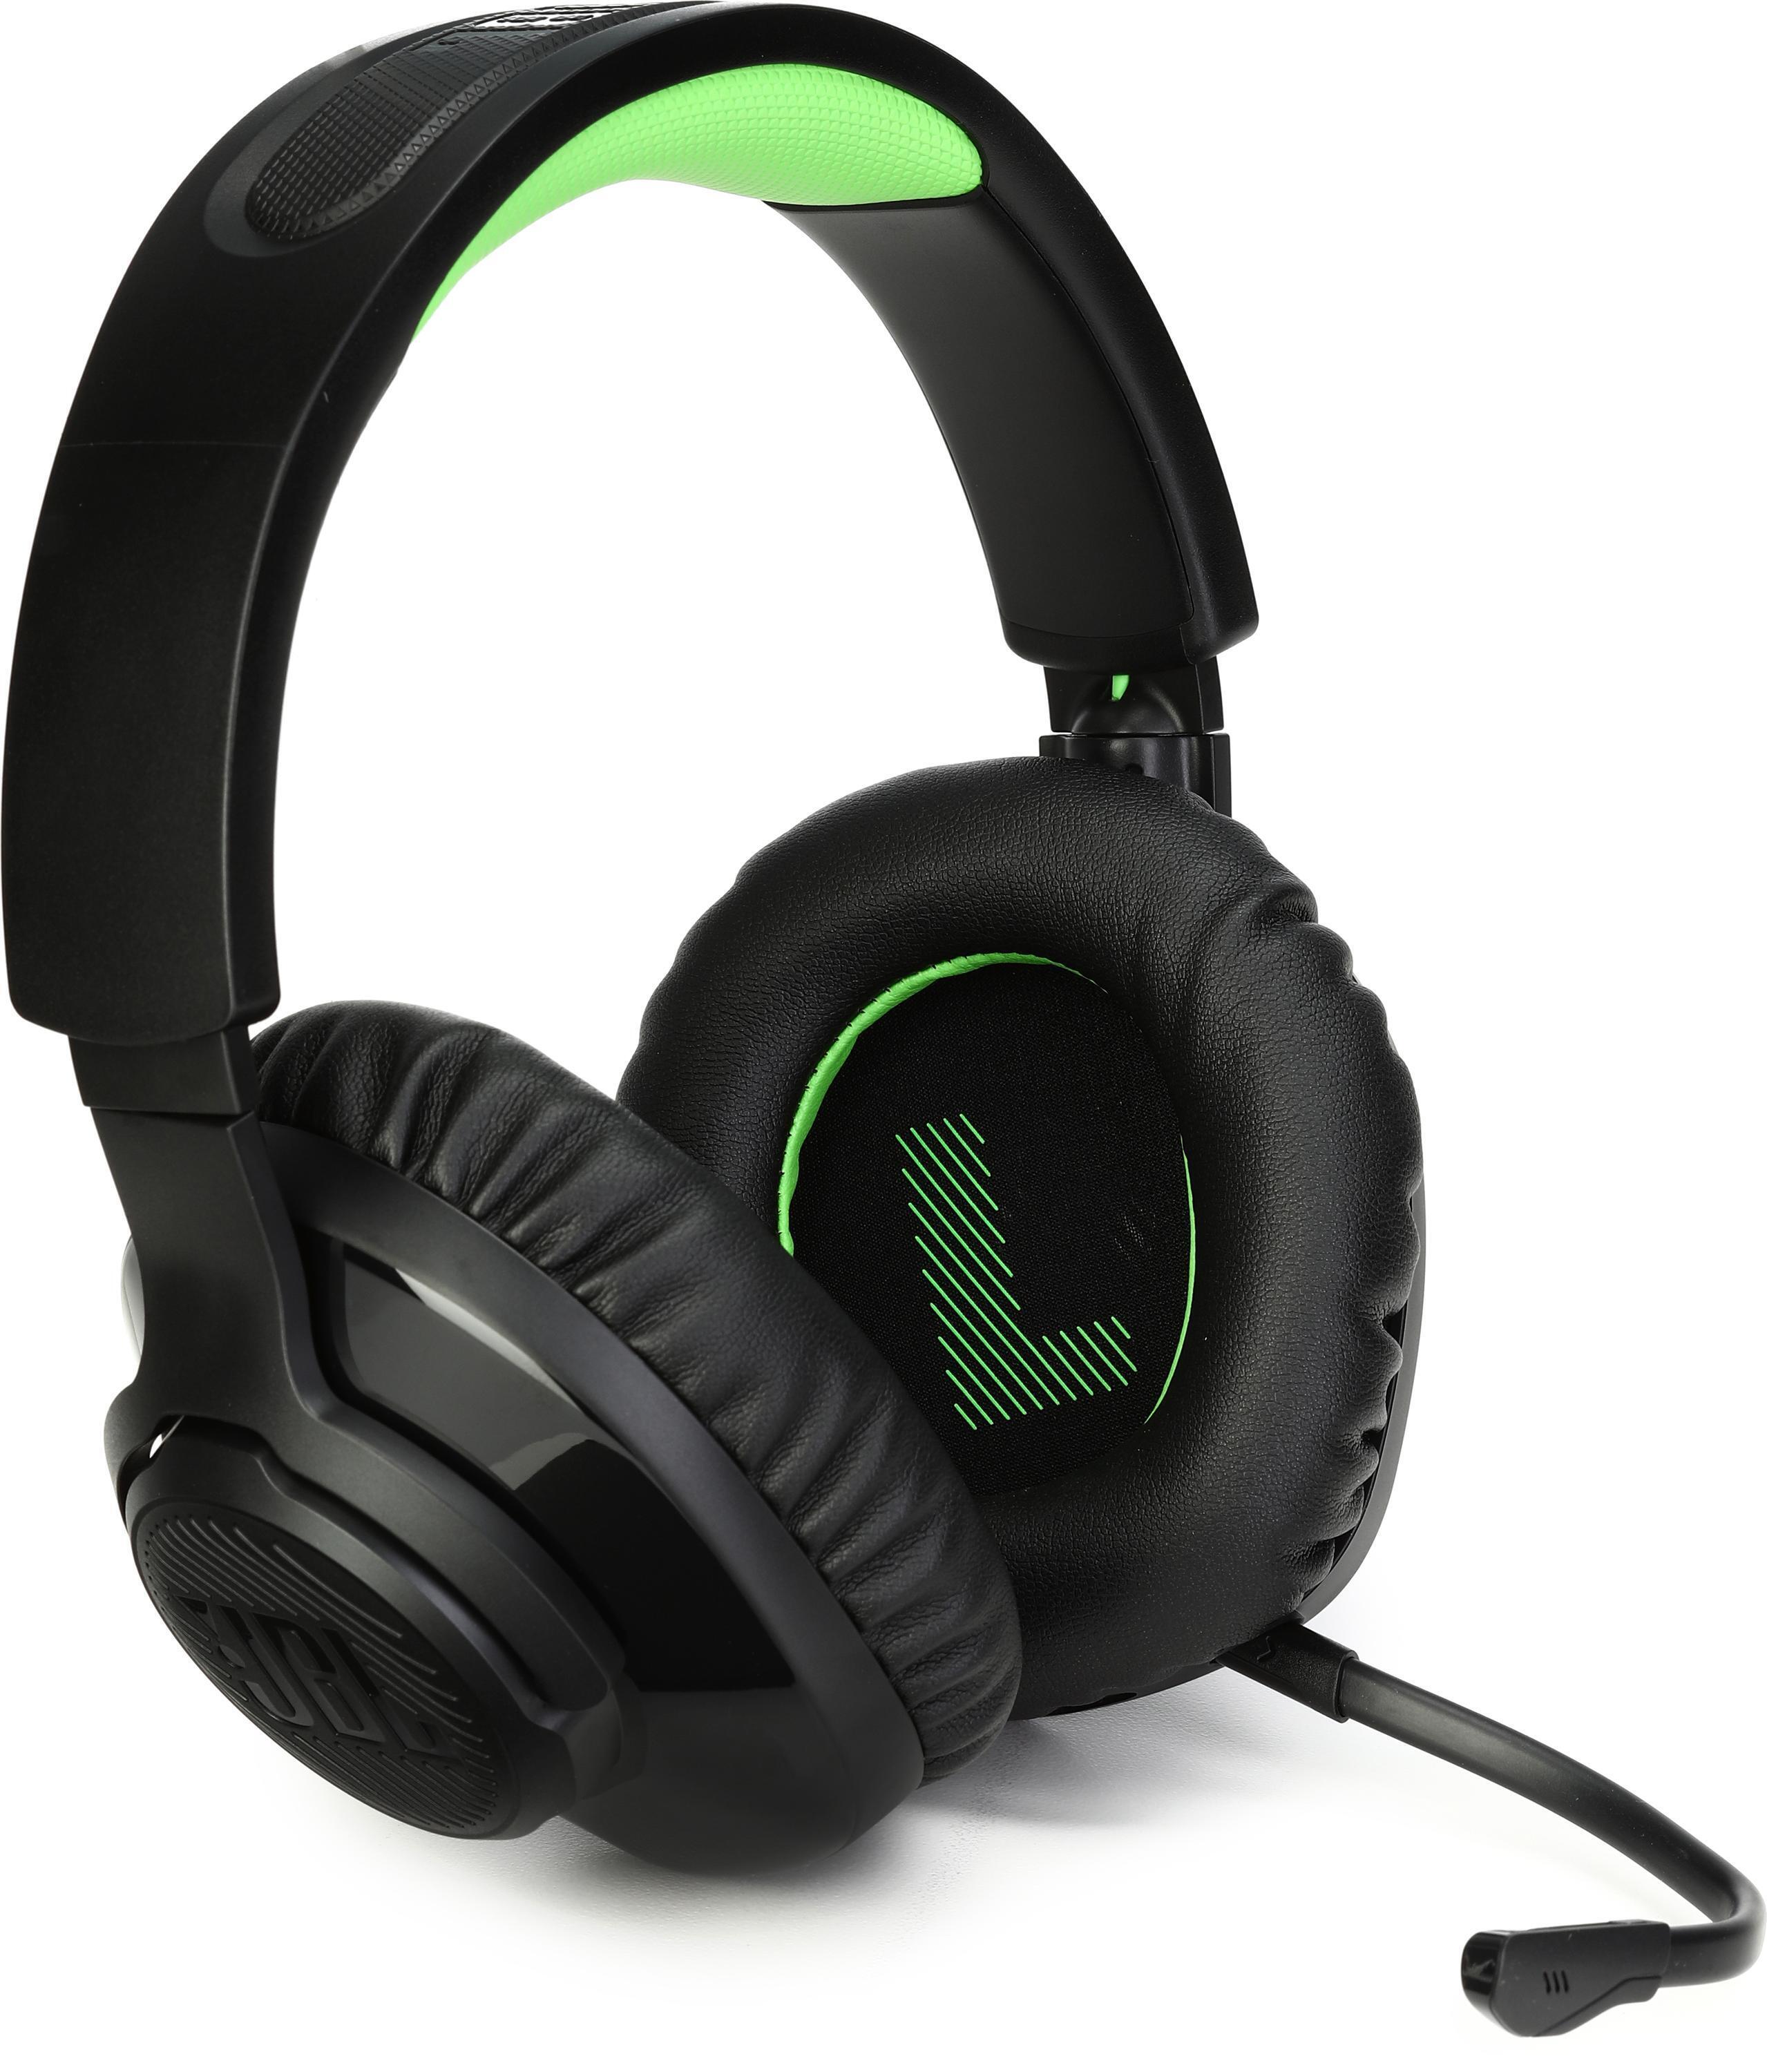 JBL Quantum 800 Wired Over-Ear Gaming Headset - Black for sale online